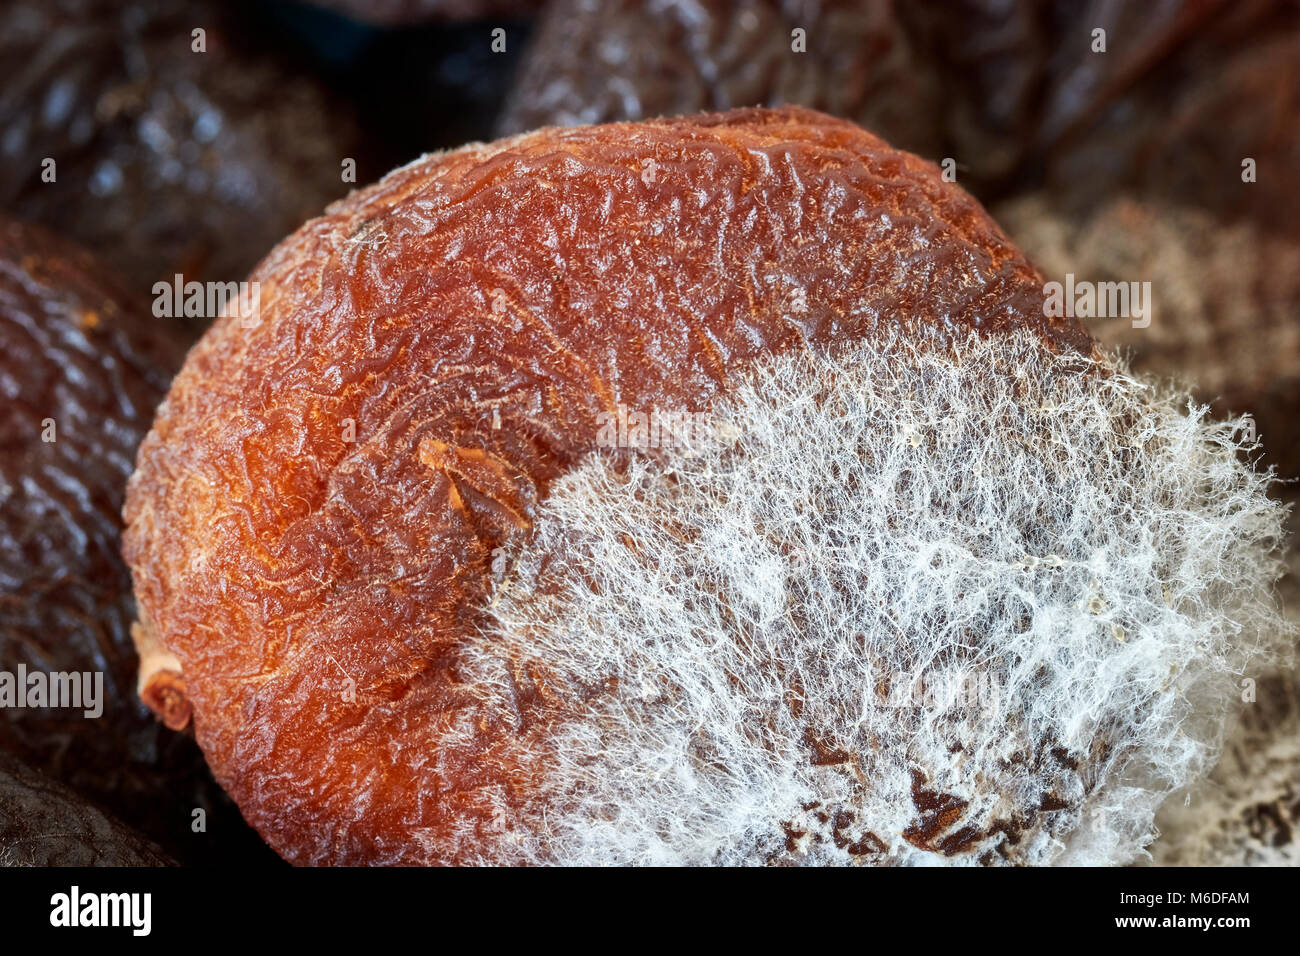 Extreme close up picture of moldy dried apricots, shallow depth of field. Stock Photo